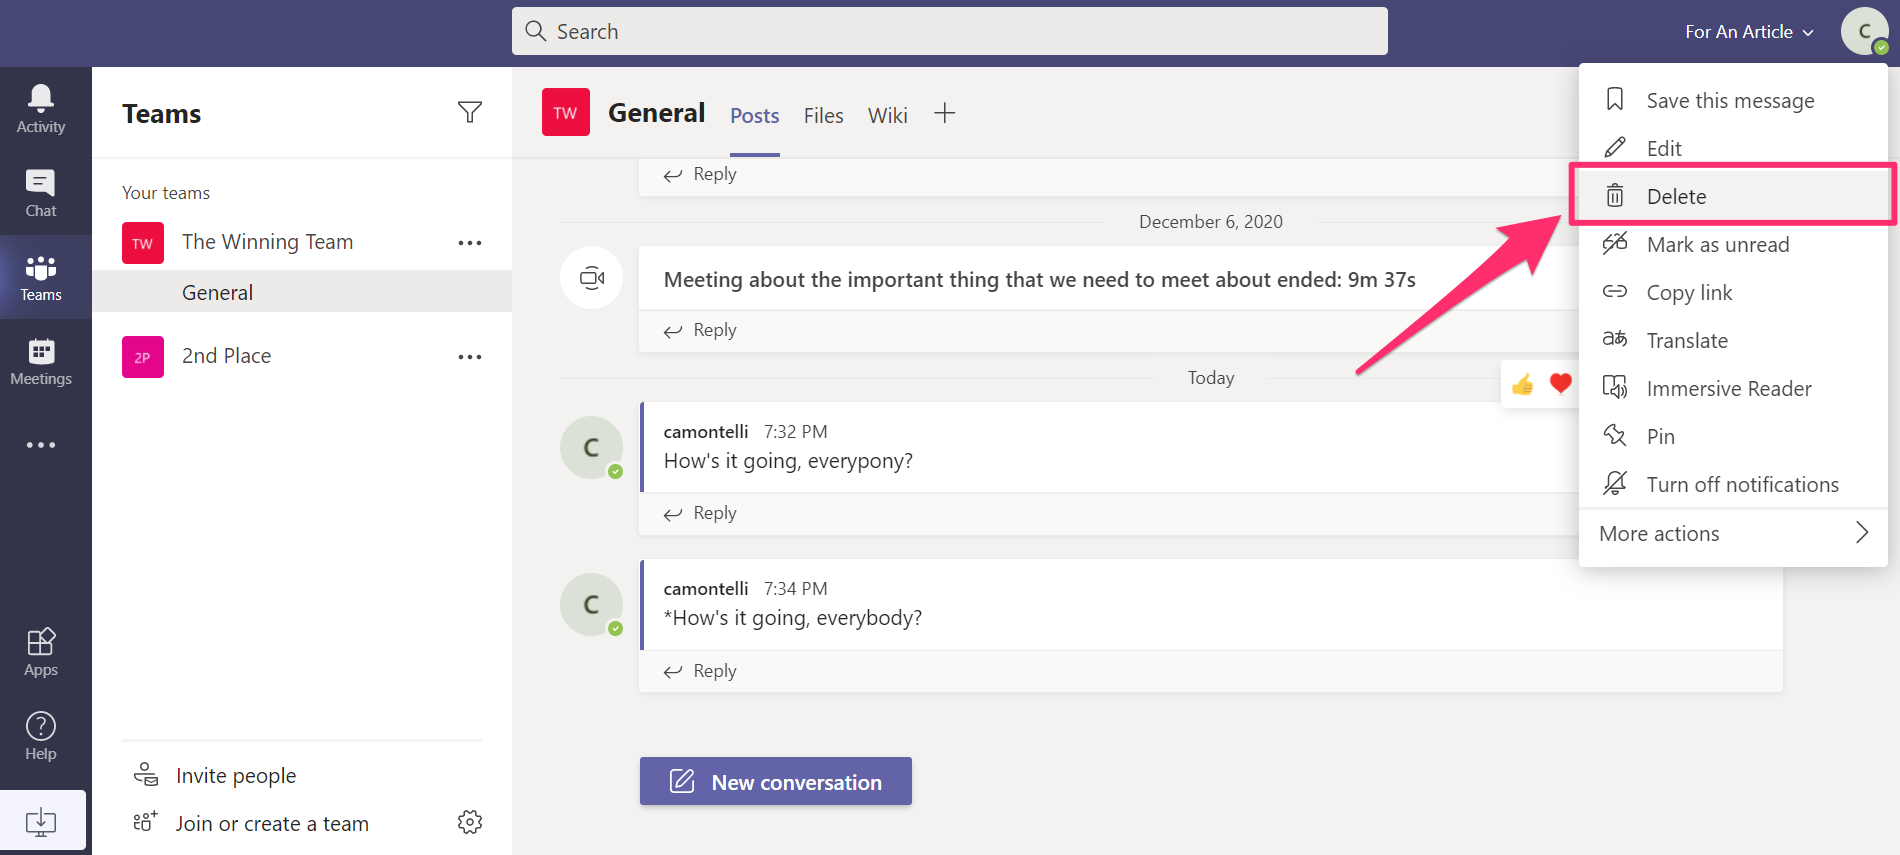 How to delete chat messages in Microsoft Teams, or hide a conversation ...